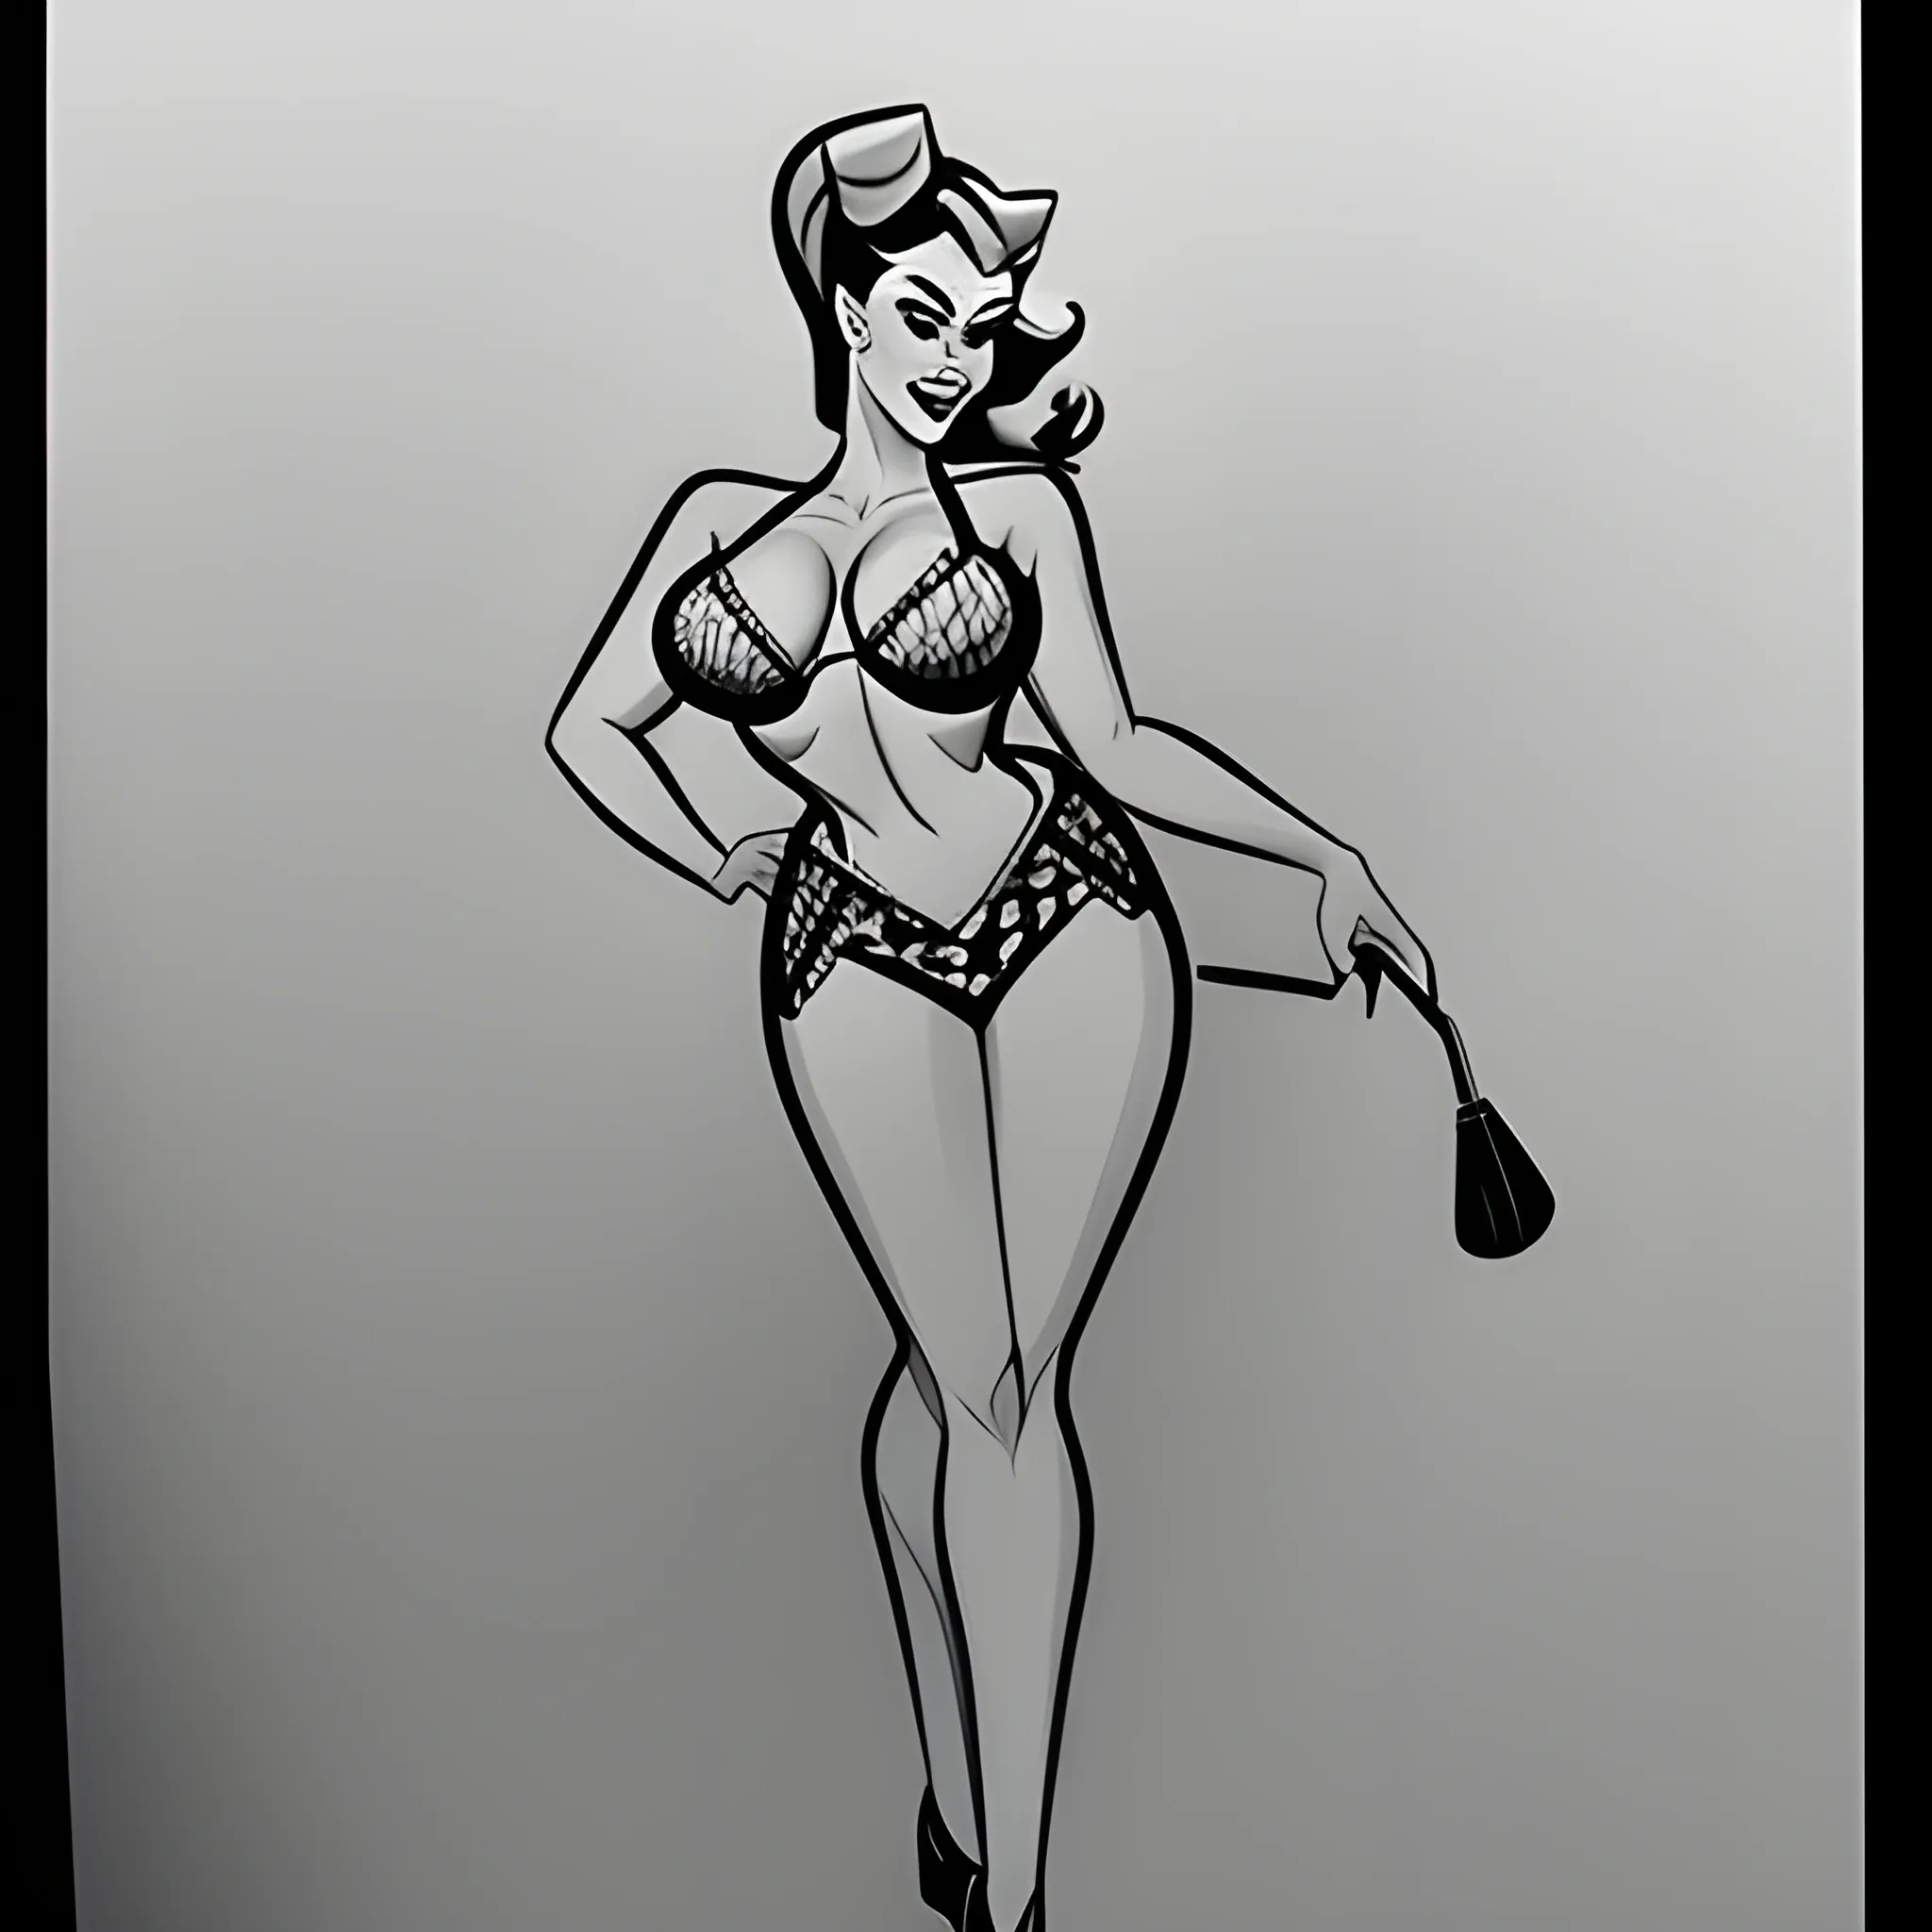 , Pencil Sketch pinup girl
, Cartoon, pinup cowgirl
